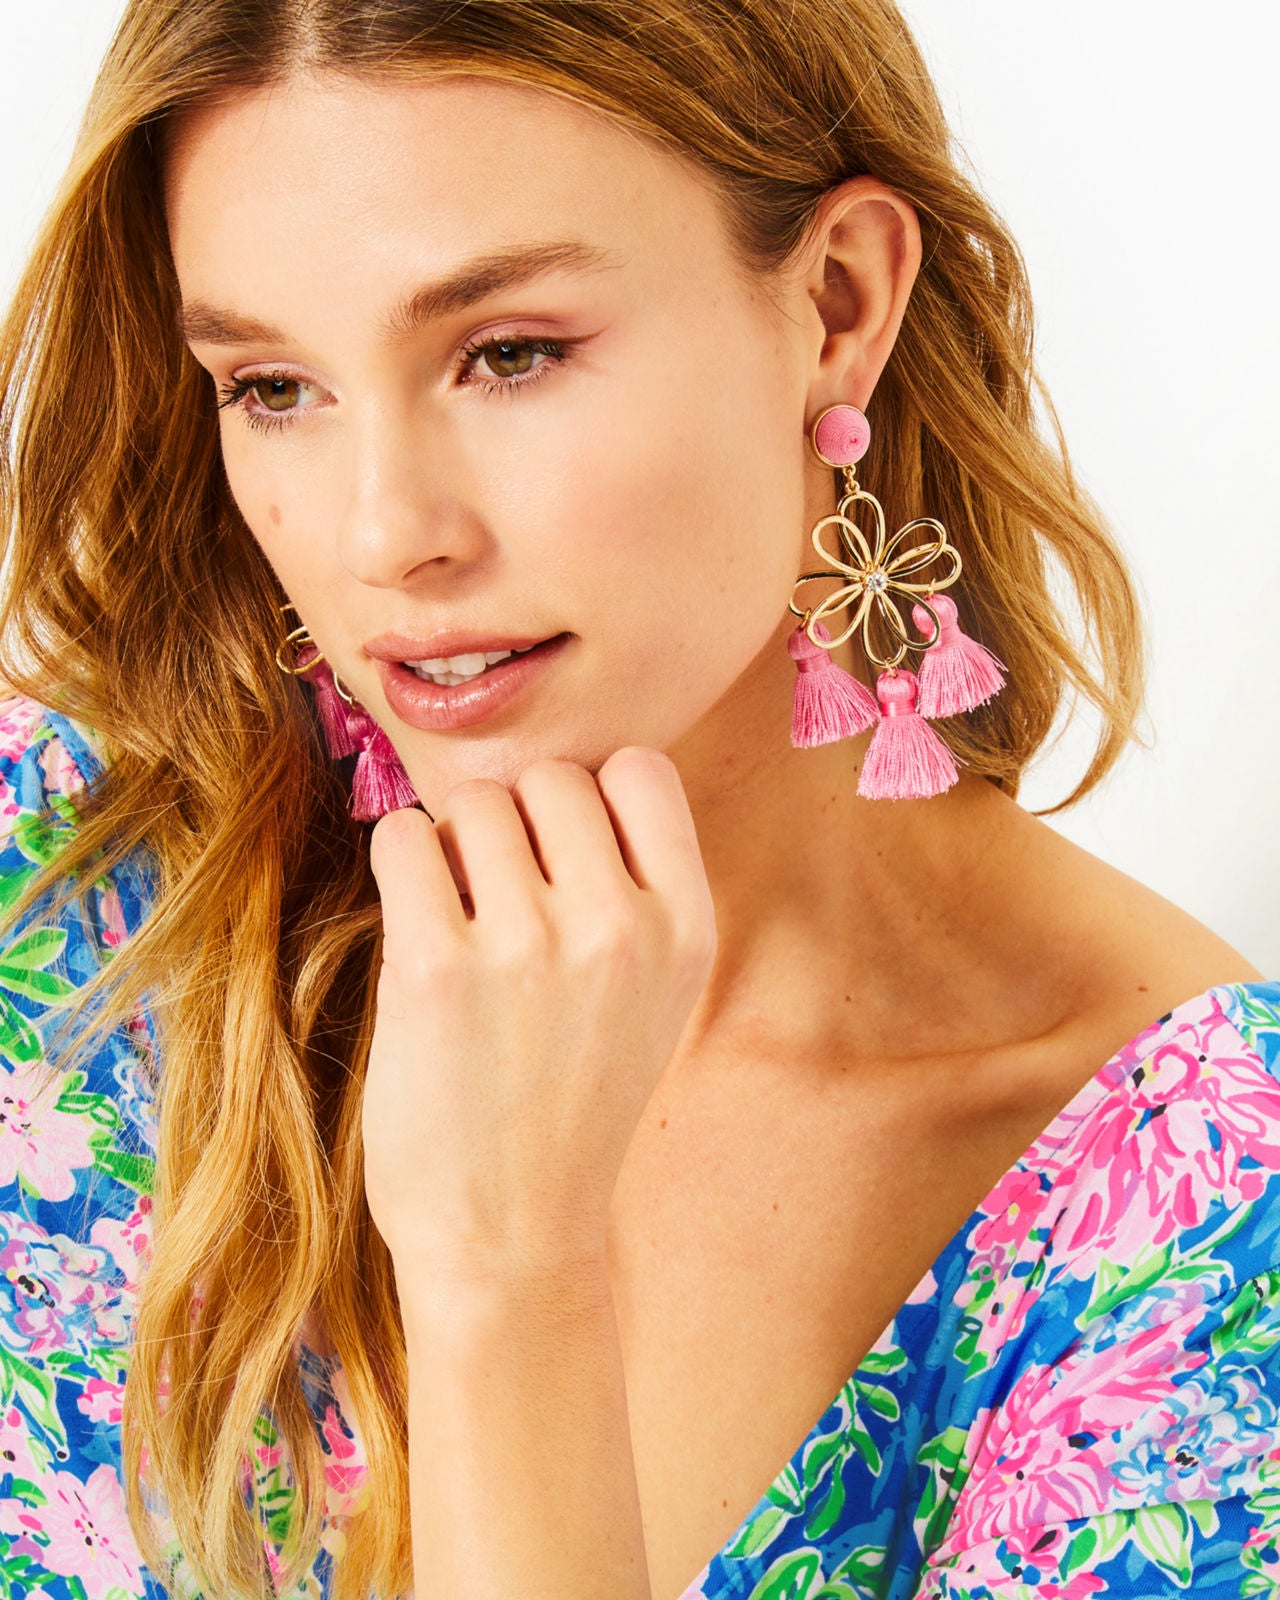 Come On Clover Earrings